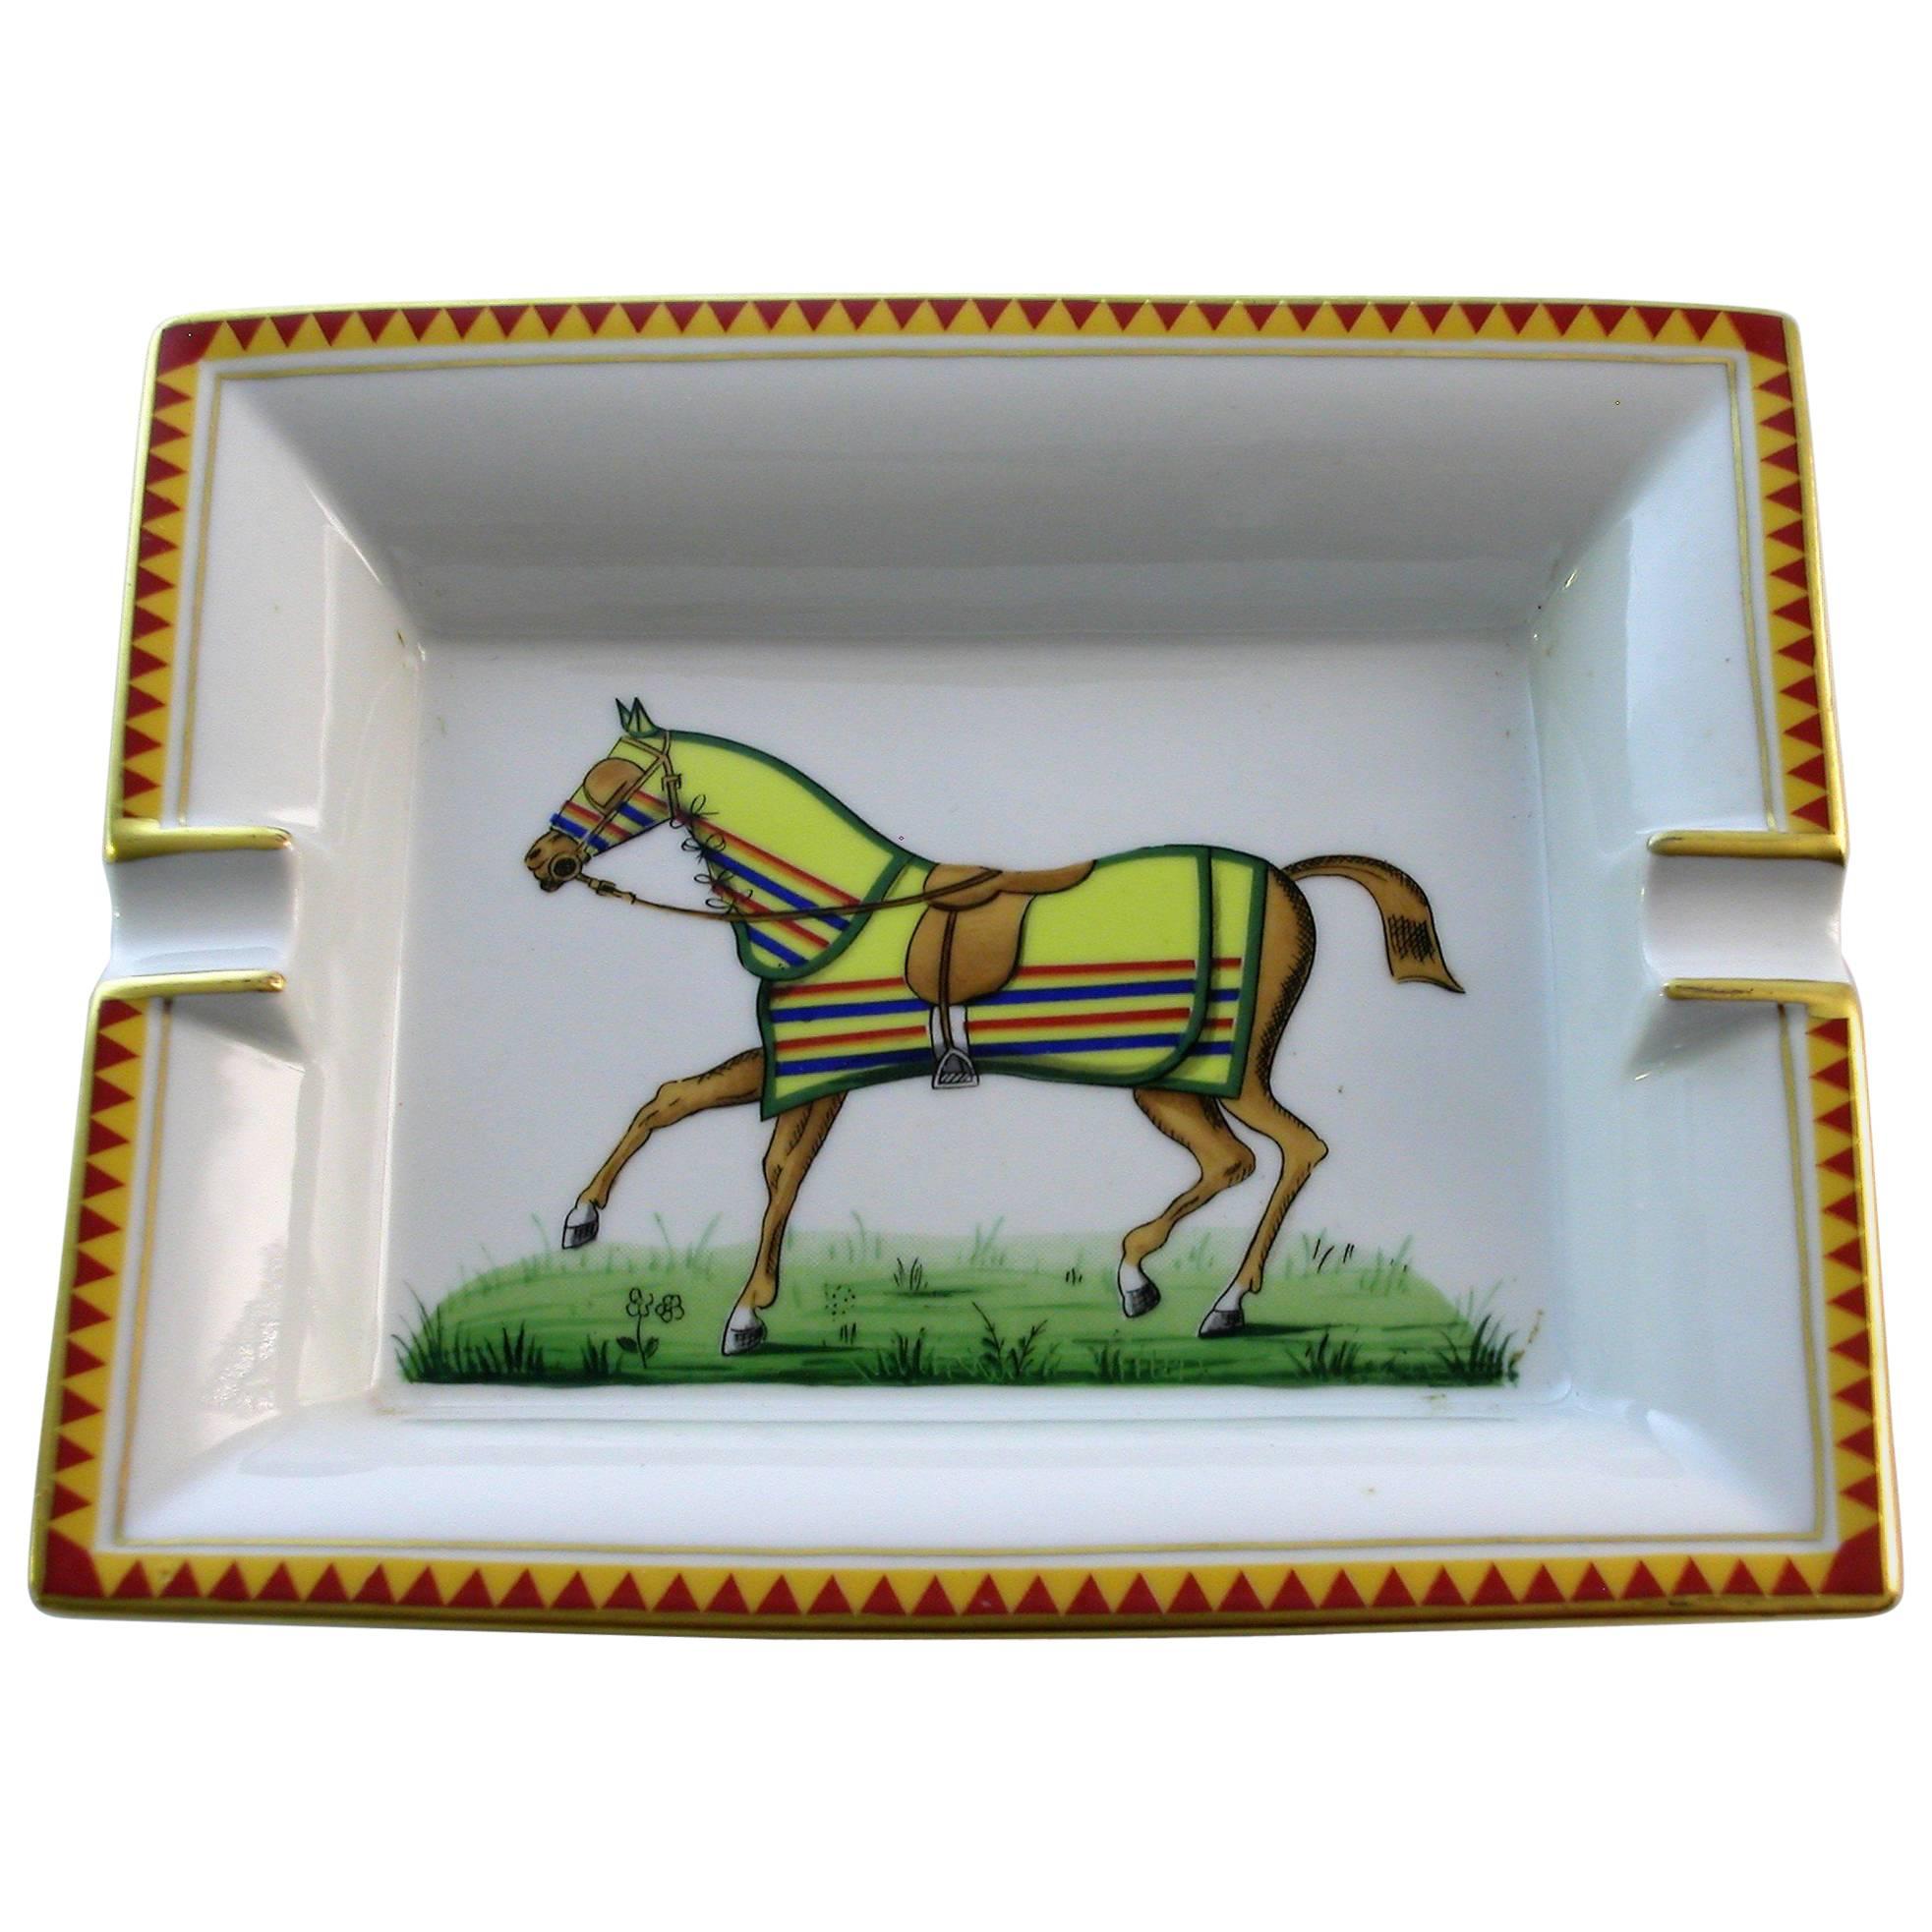 Hermès Paris, Ashtray with Horse, Hand-Painted